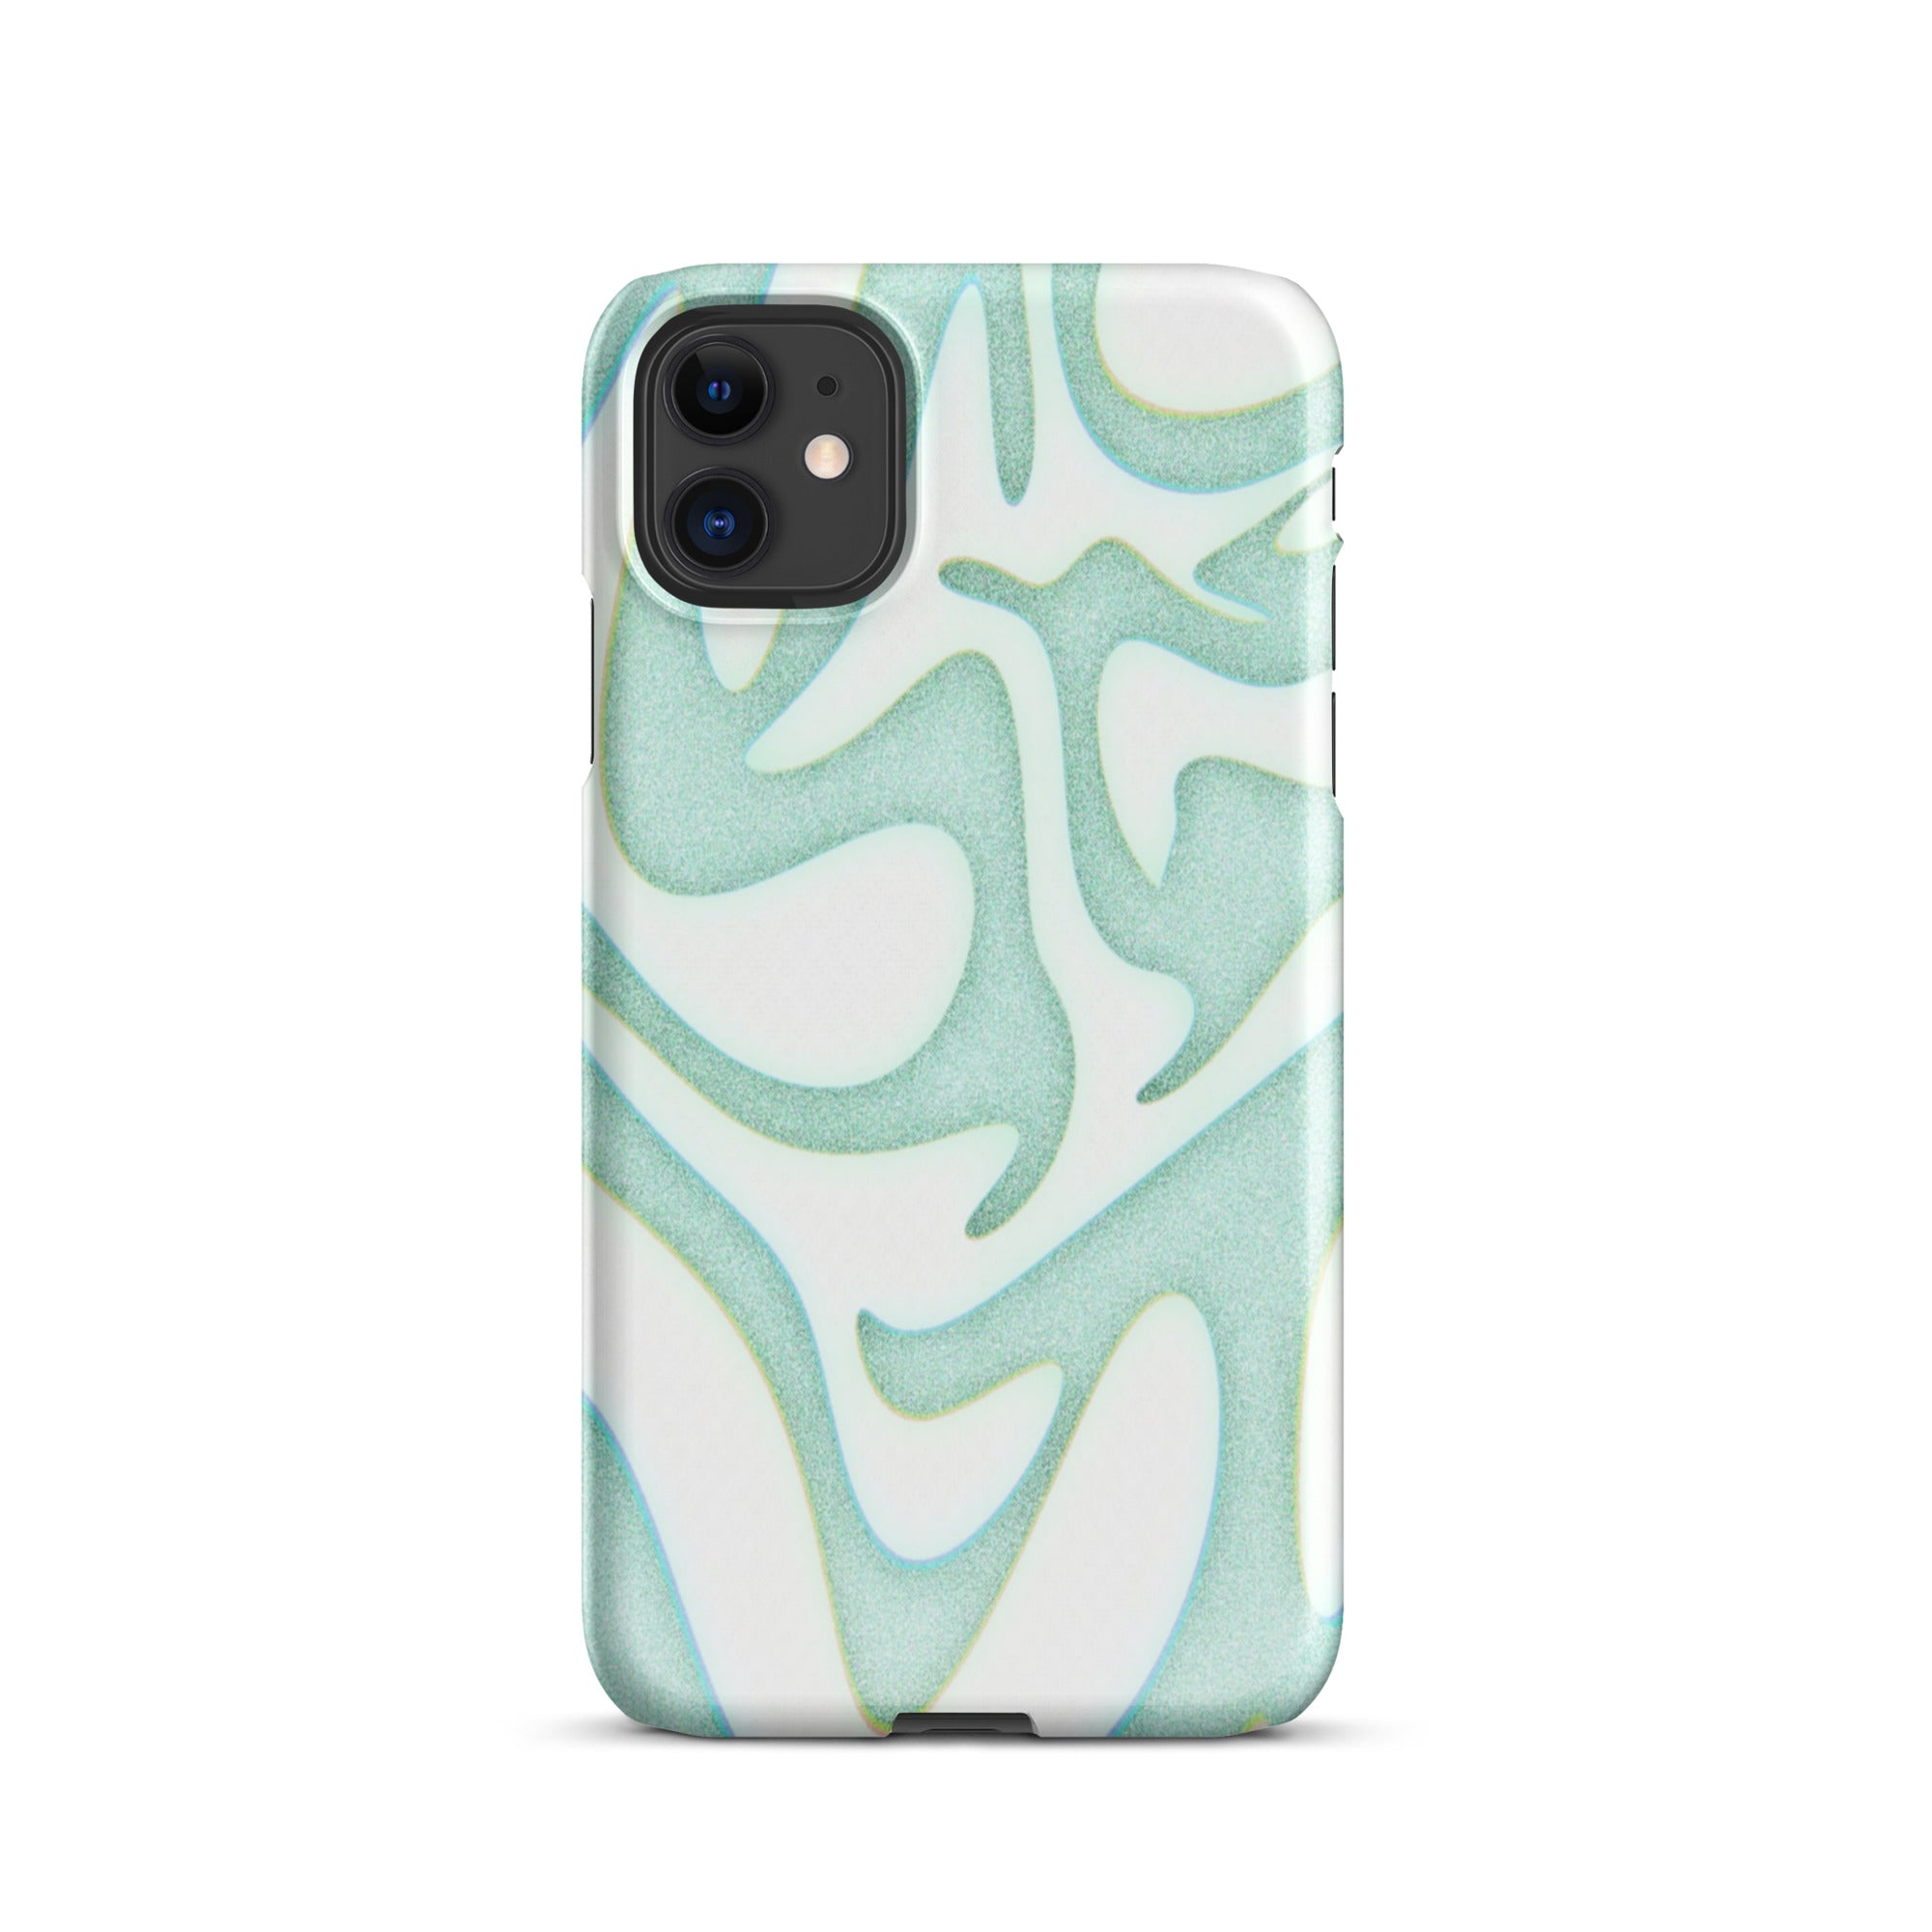 snap-case-for-iphone-glossy-iphone-11-front-64d9bb7442e2a.jpg